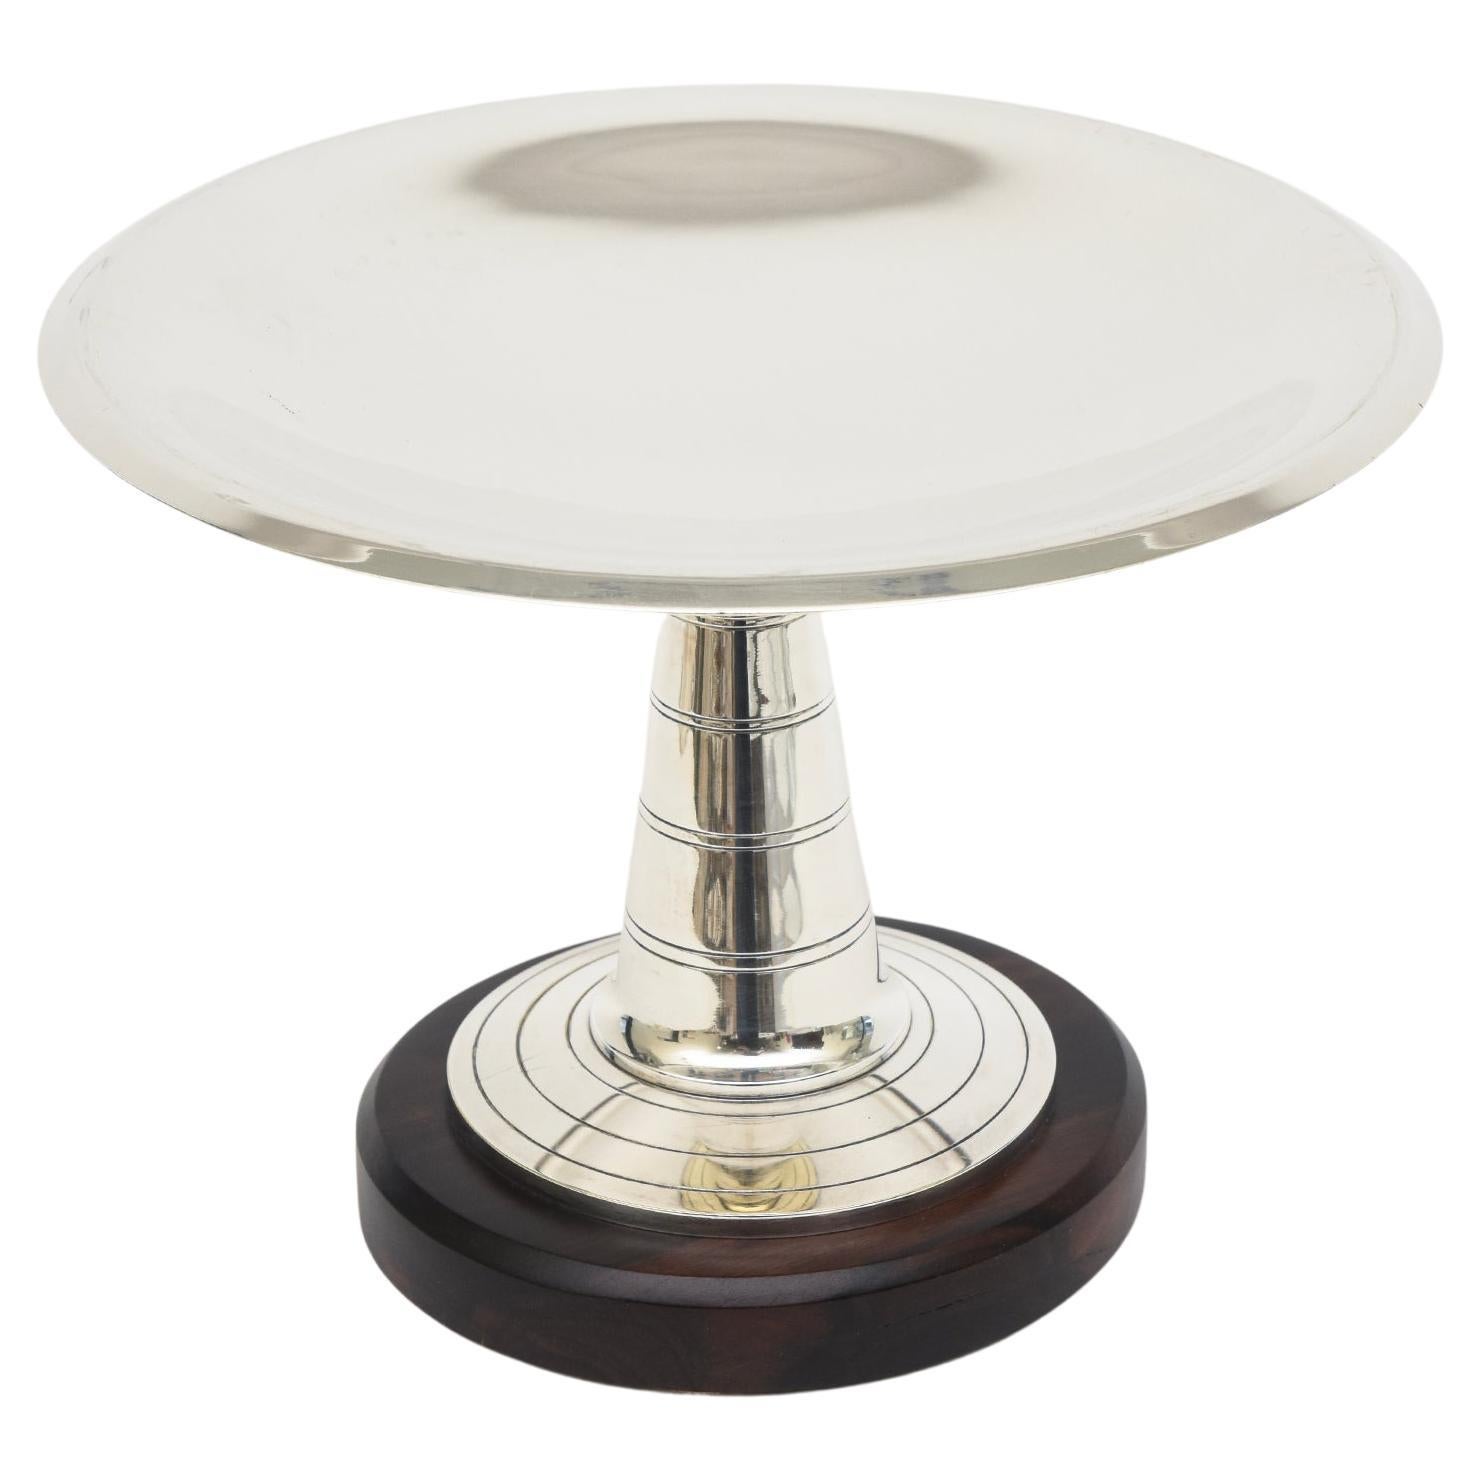 Vintage Art Deco French Silver-Plate and Rosewood Pedestal Bowl Or Serving Piece For Sale